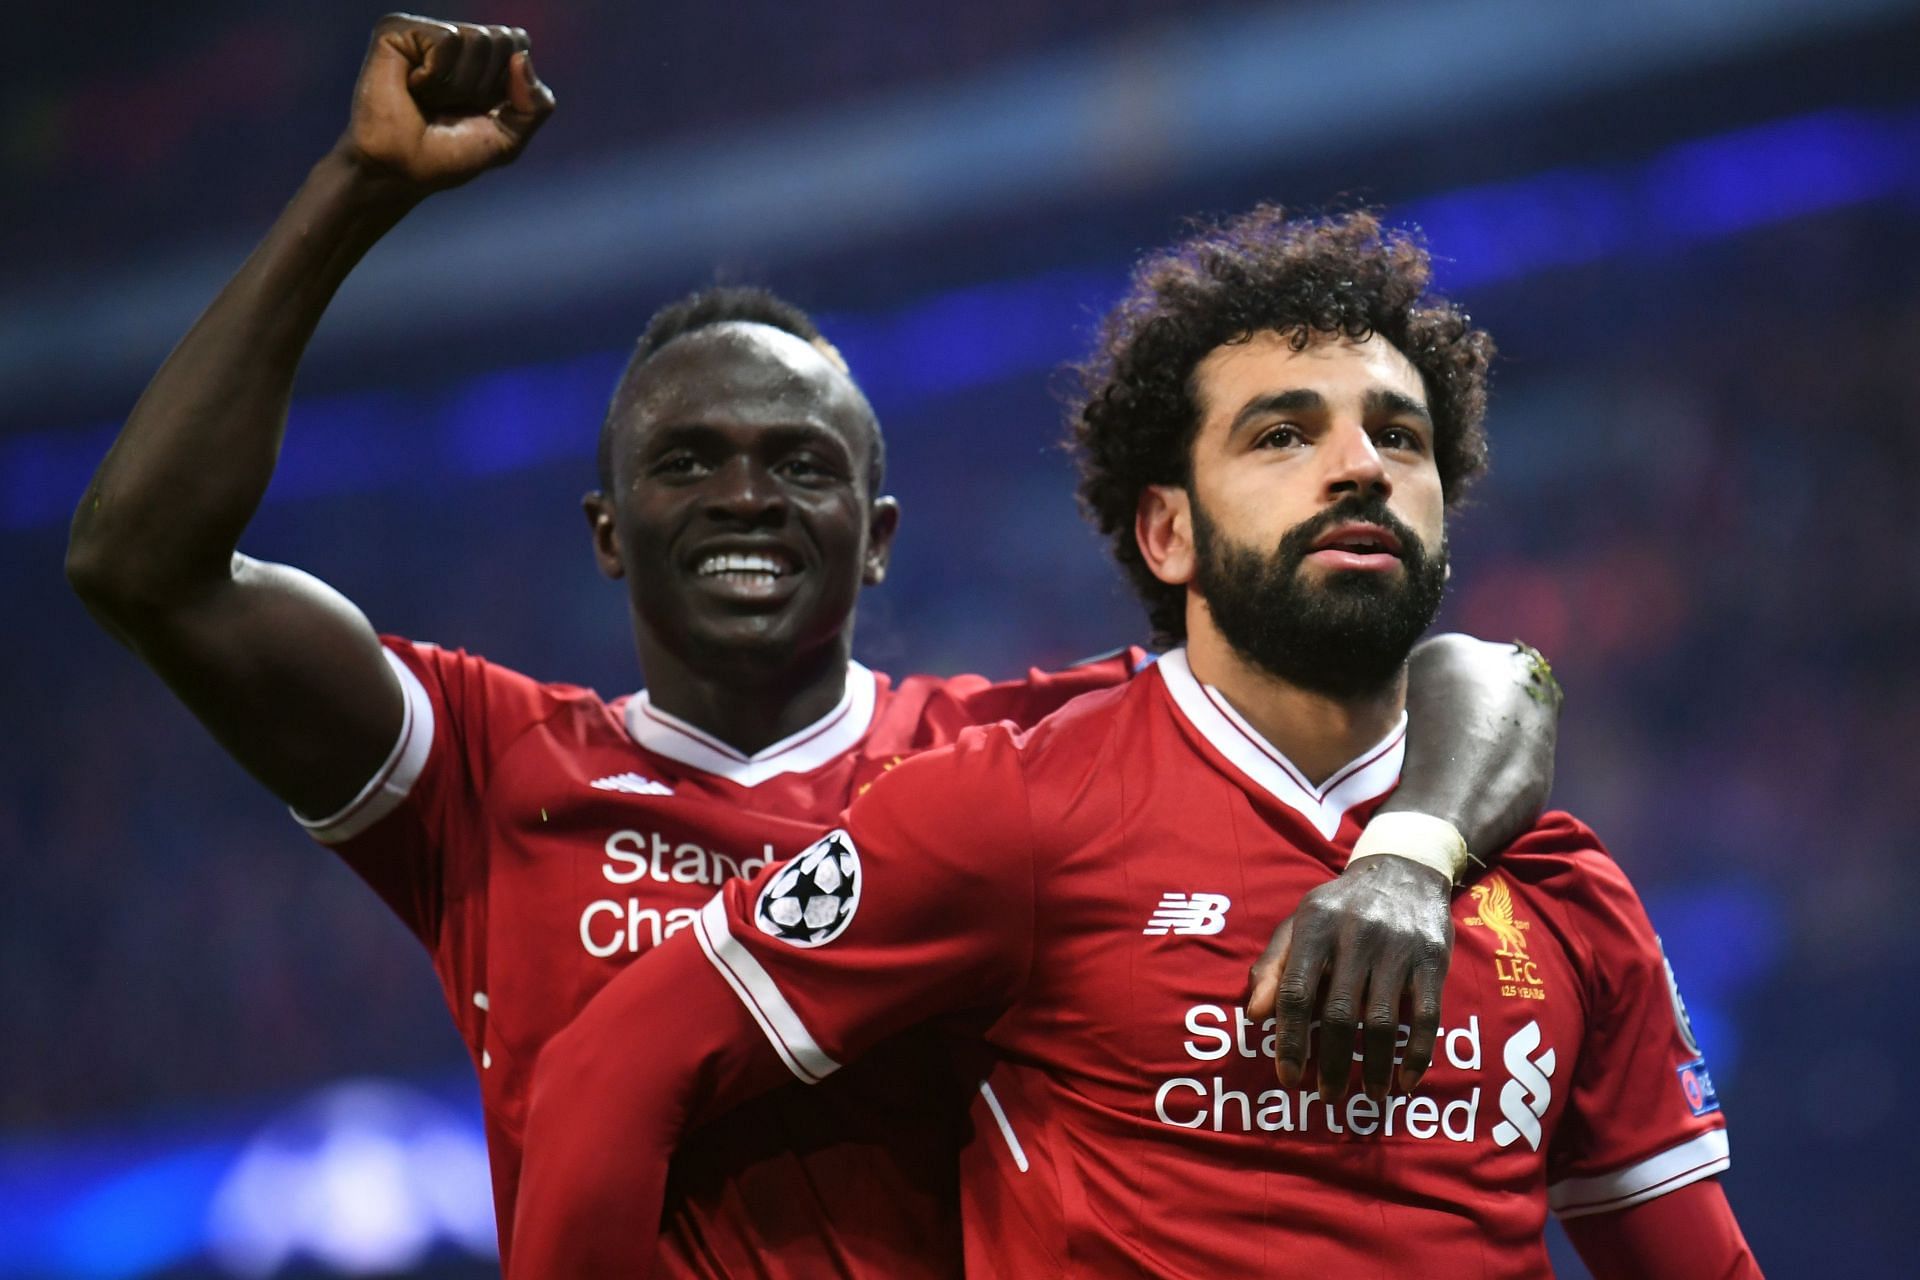 Mane and Salah battled it out in the final of AFCON